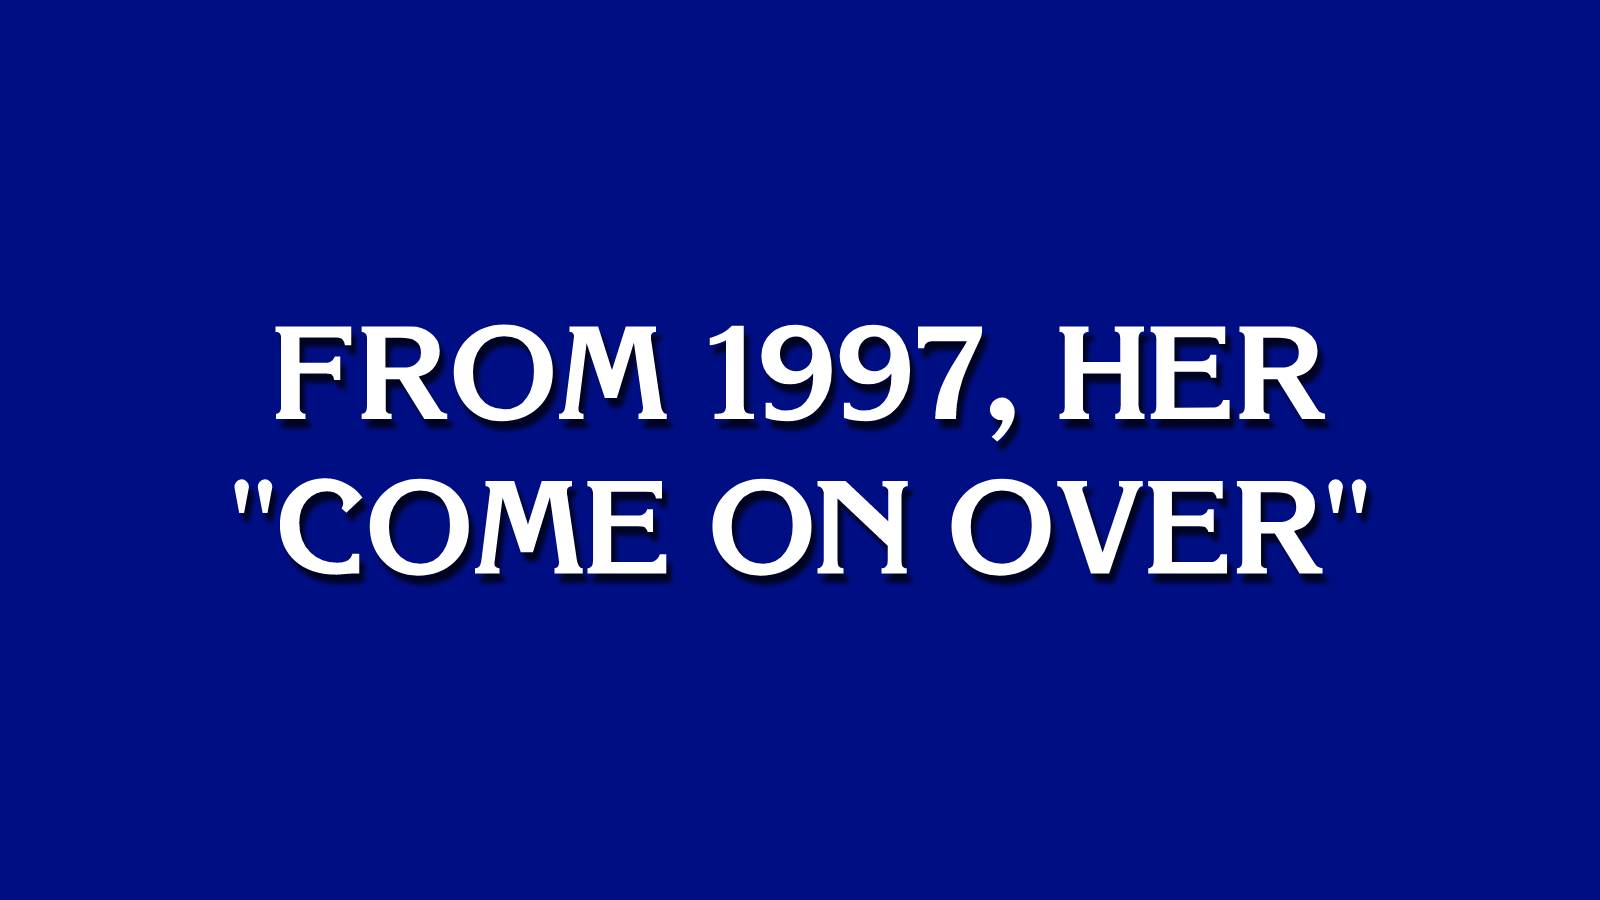 Do You Have the Smarts to Win This Game of “Jeopardy!”? Template Jeopardy 31